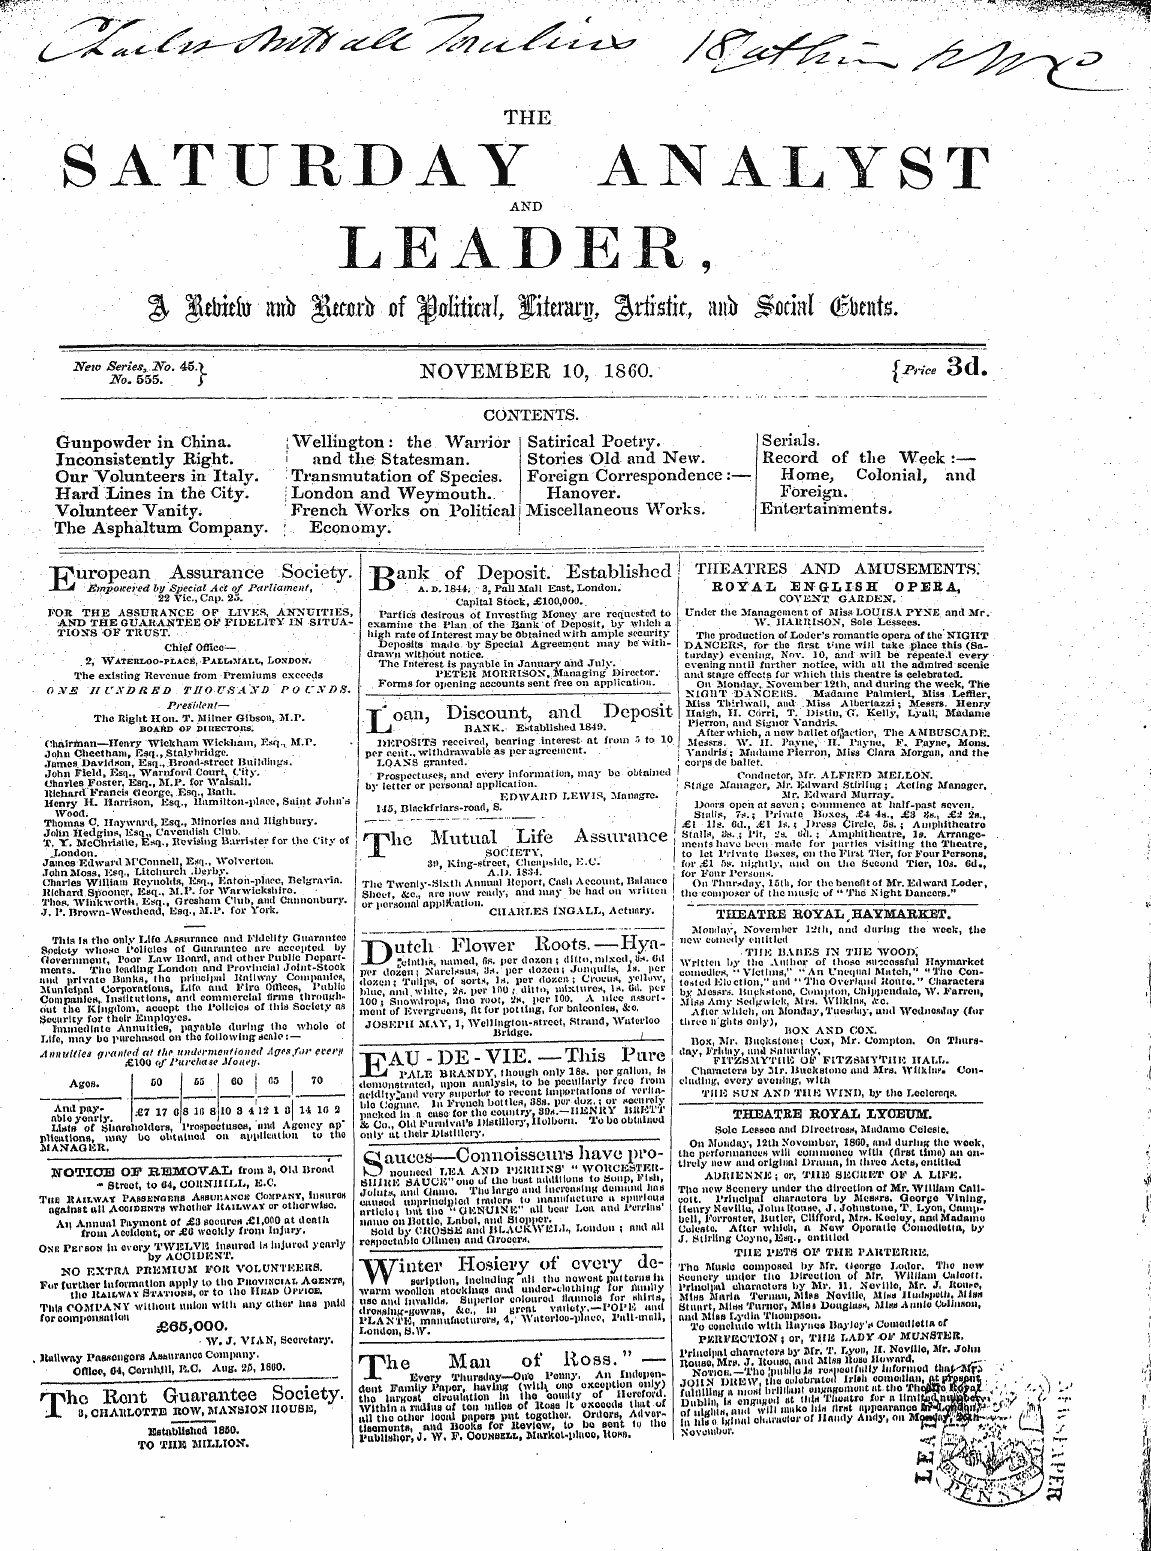 Leader (1850-1860): jS F Y, 2nd edition - •>• . •>•.;. / . . \ . , . ¦ . : . . ..•...